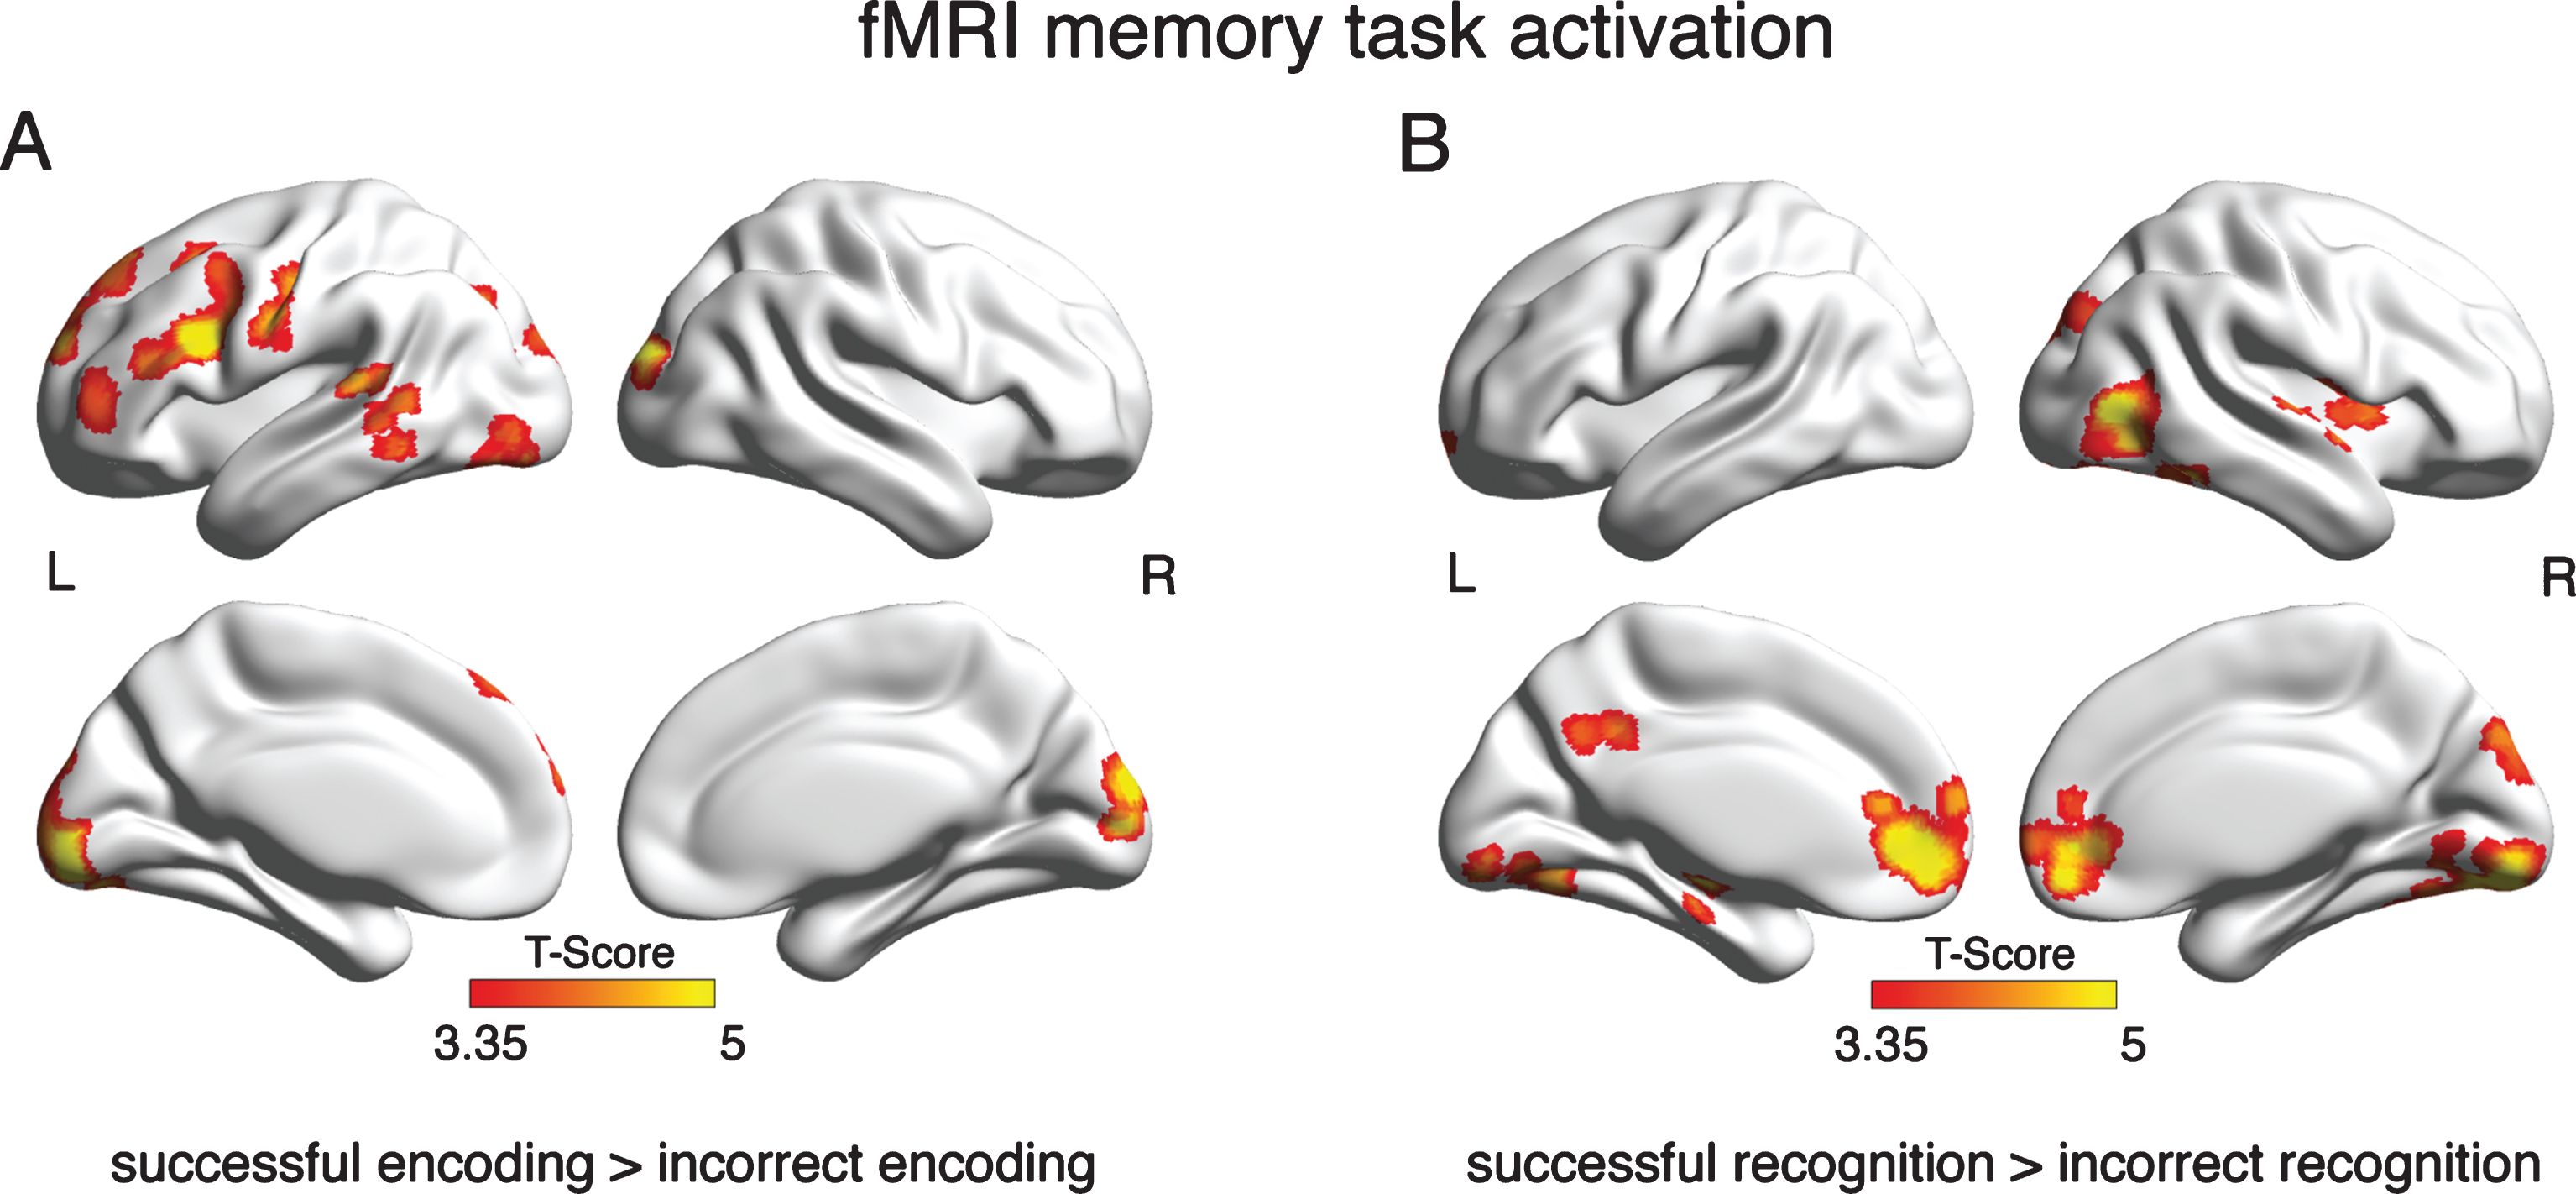 Brain areas that showed significant activation in the GLM analysis of the fMRI memory task. Depicted are clusters where brain activation was significantly greater during successful than incorrect encoding (A) or recognition (B) at a voxel threshold of α= 0.001 and a FWE corrected cluster threshold at α= 0.05.